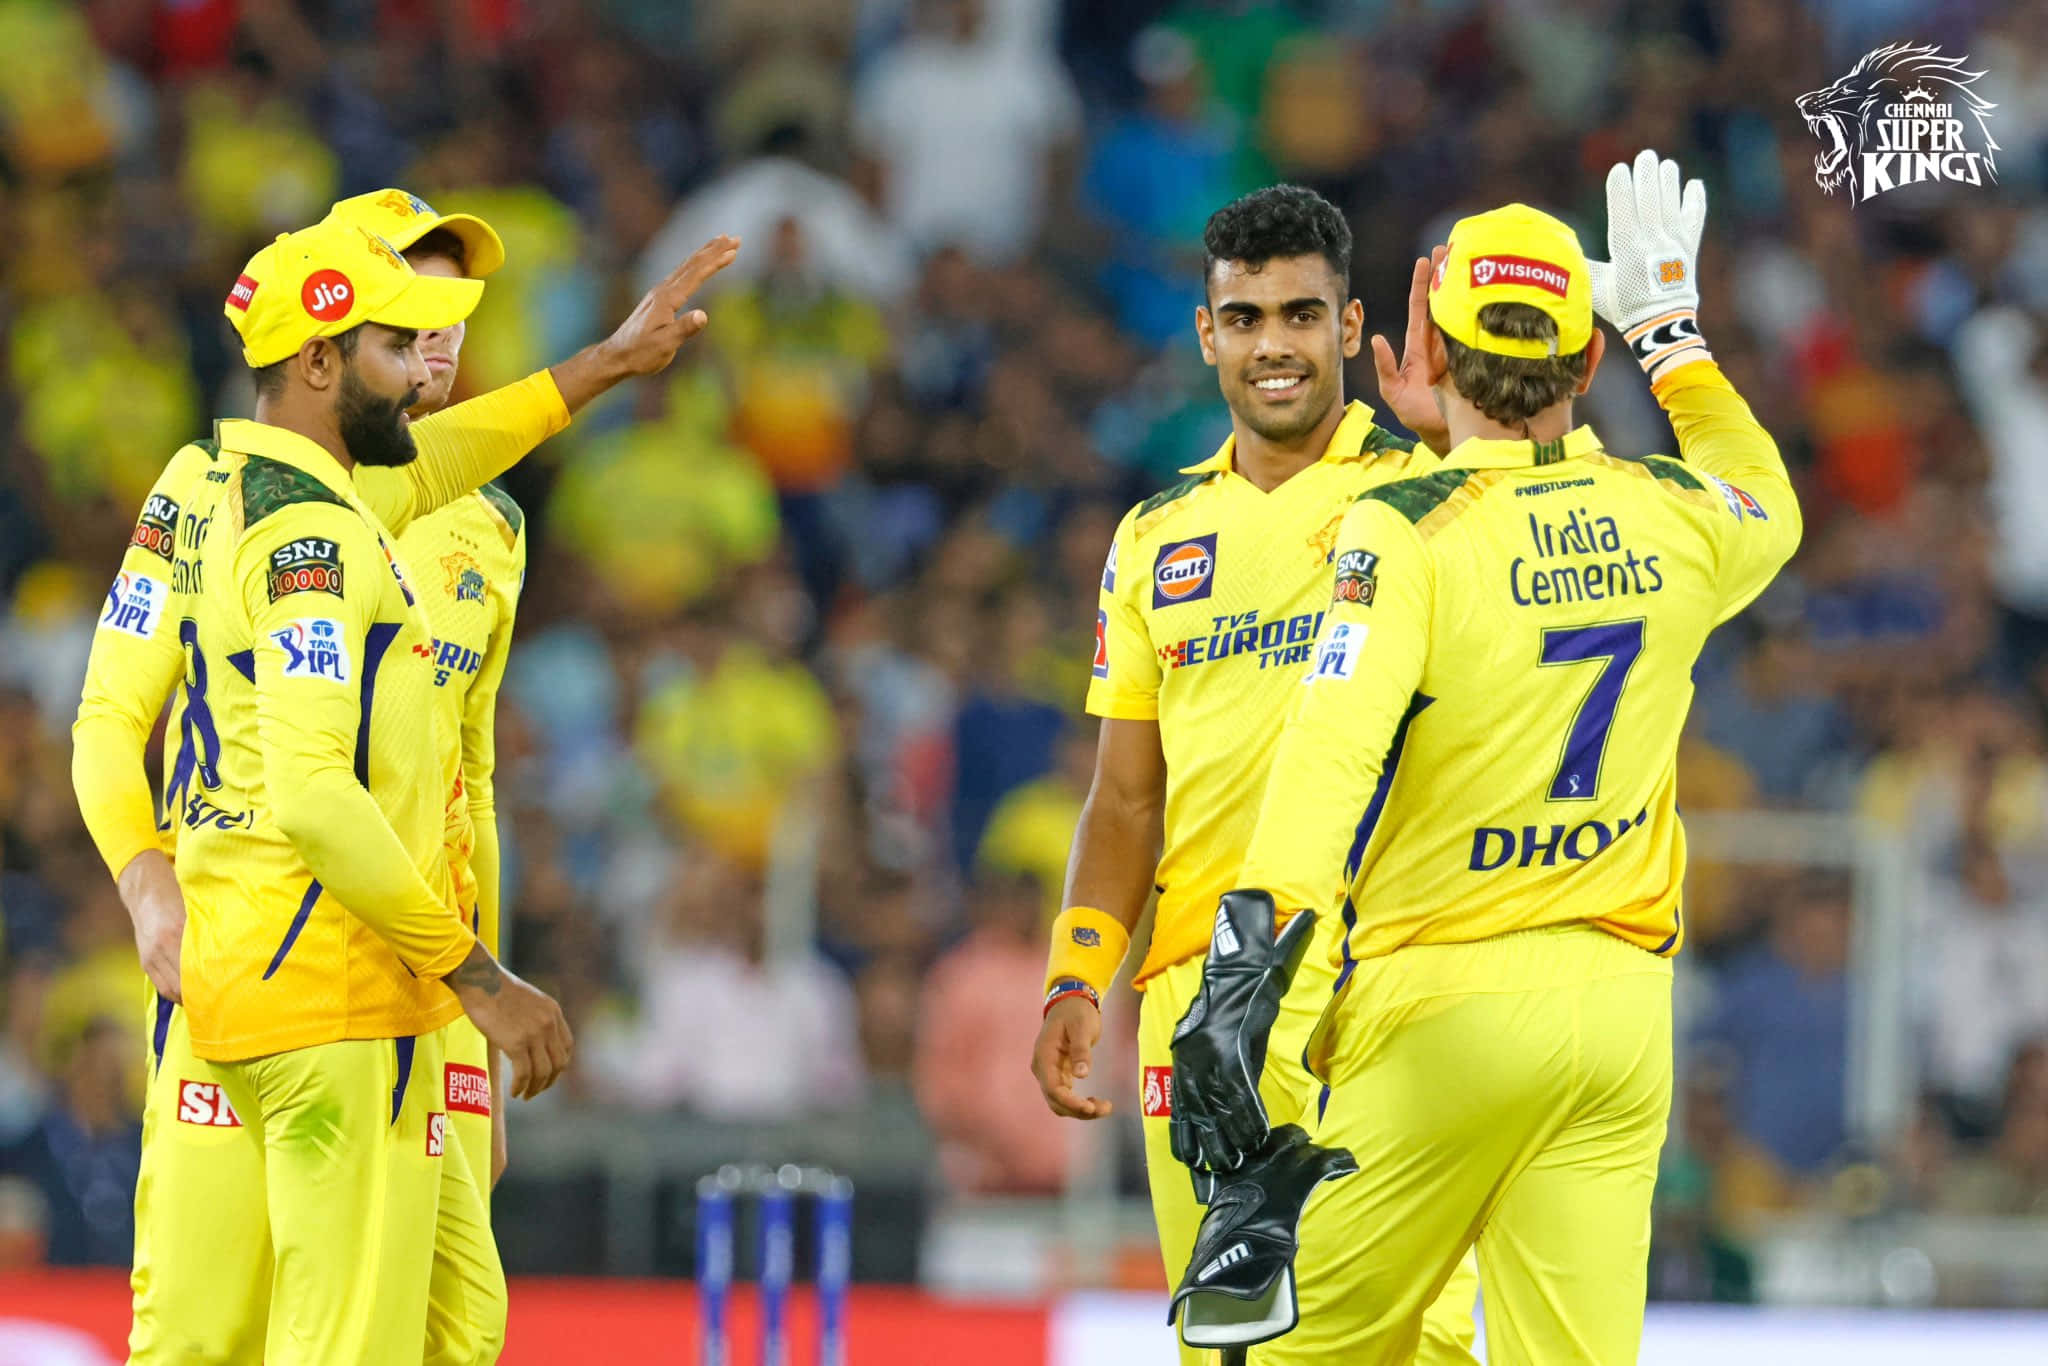 Chennai Super Kings roaring for victory